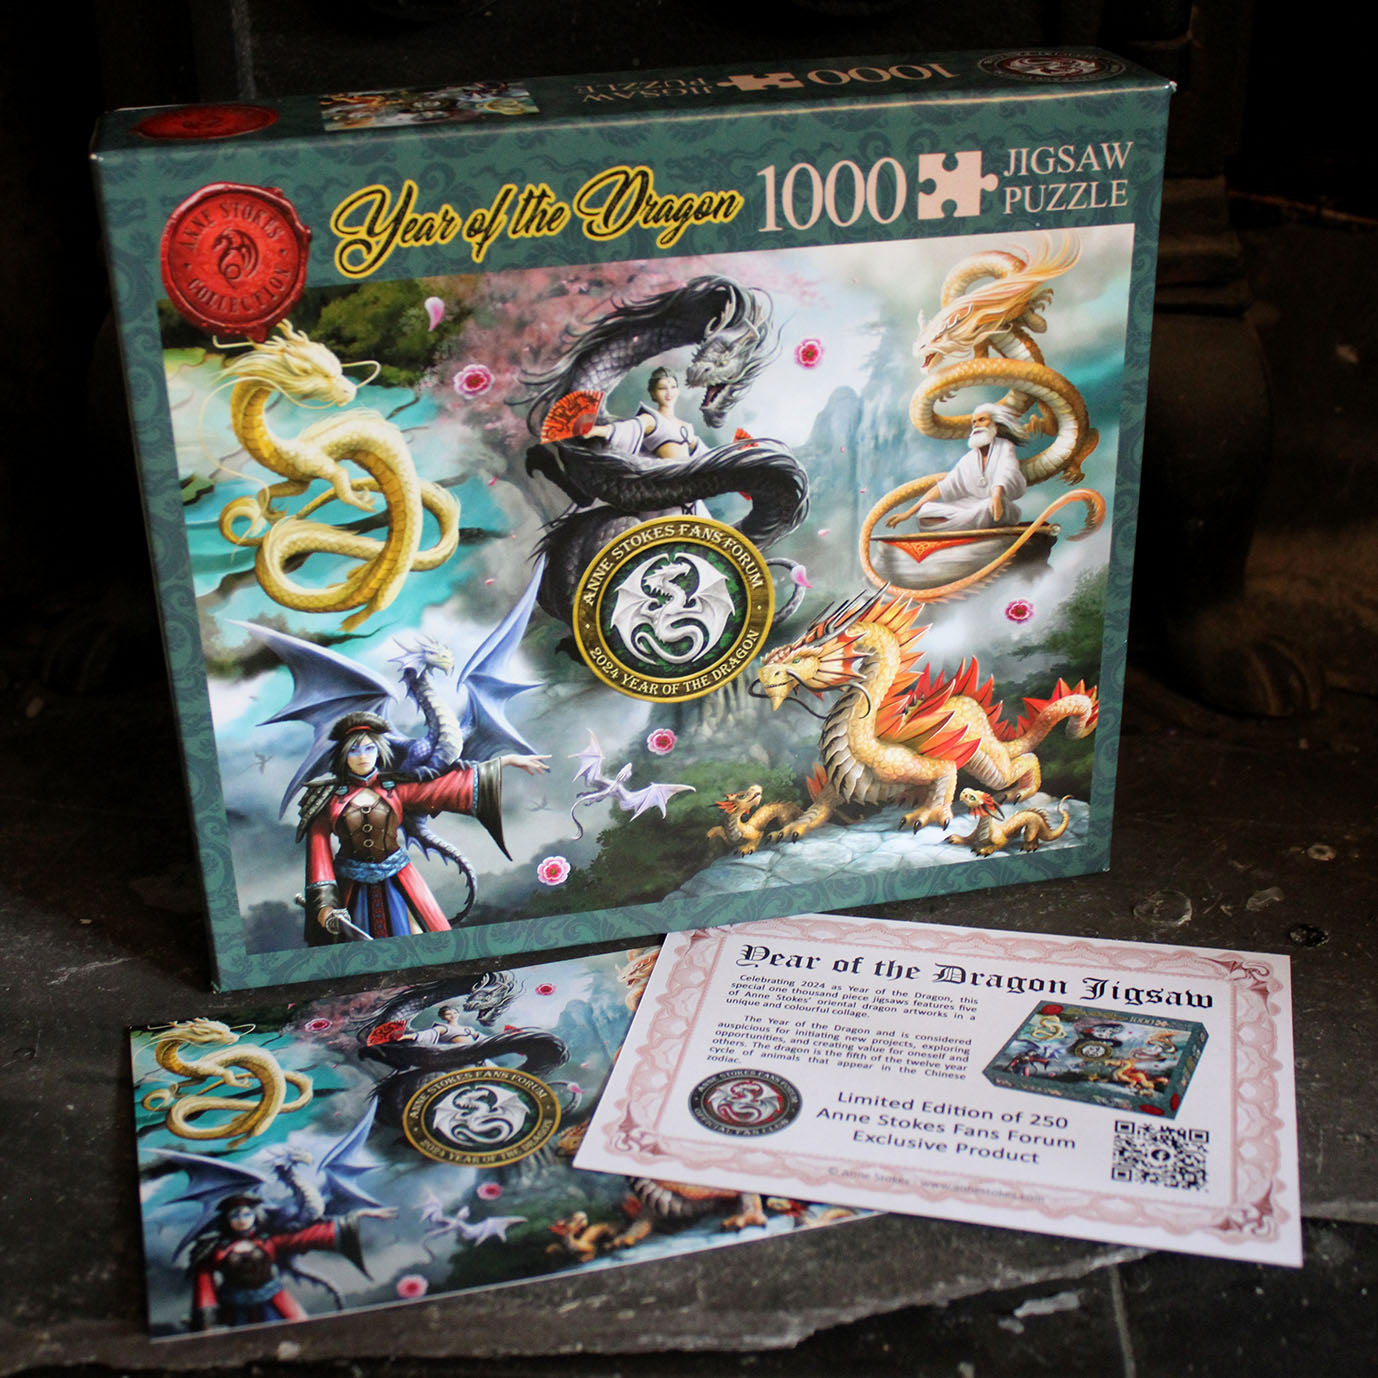 Anne Stokes Fan Forum Year of the Dragon, 1000 Piece Jigsaw Puzzle